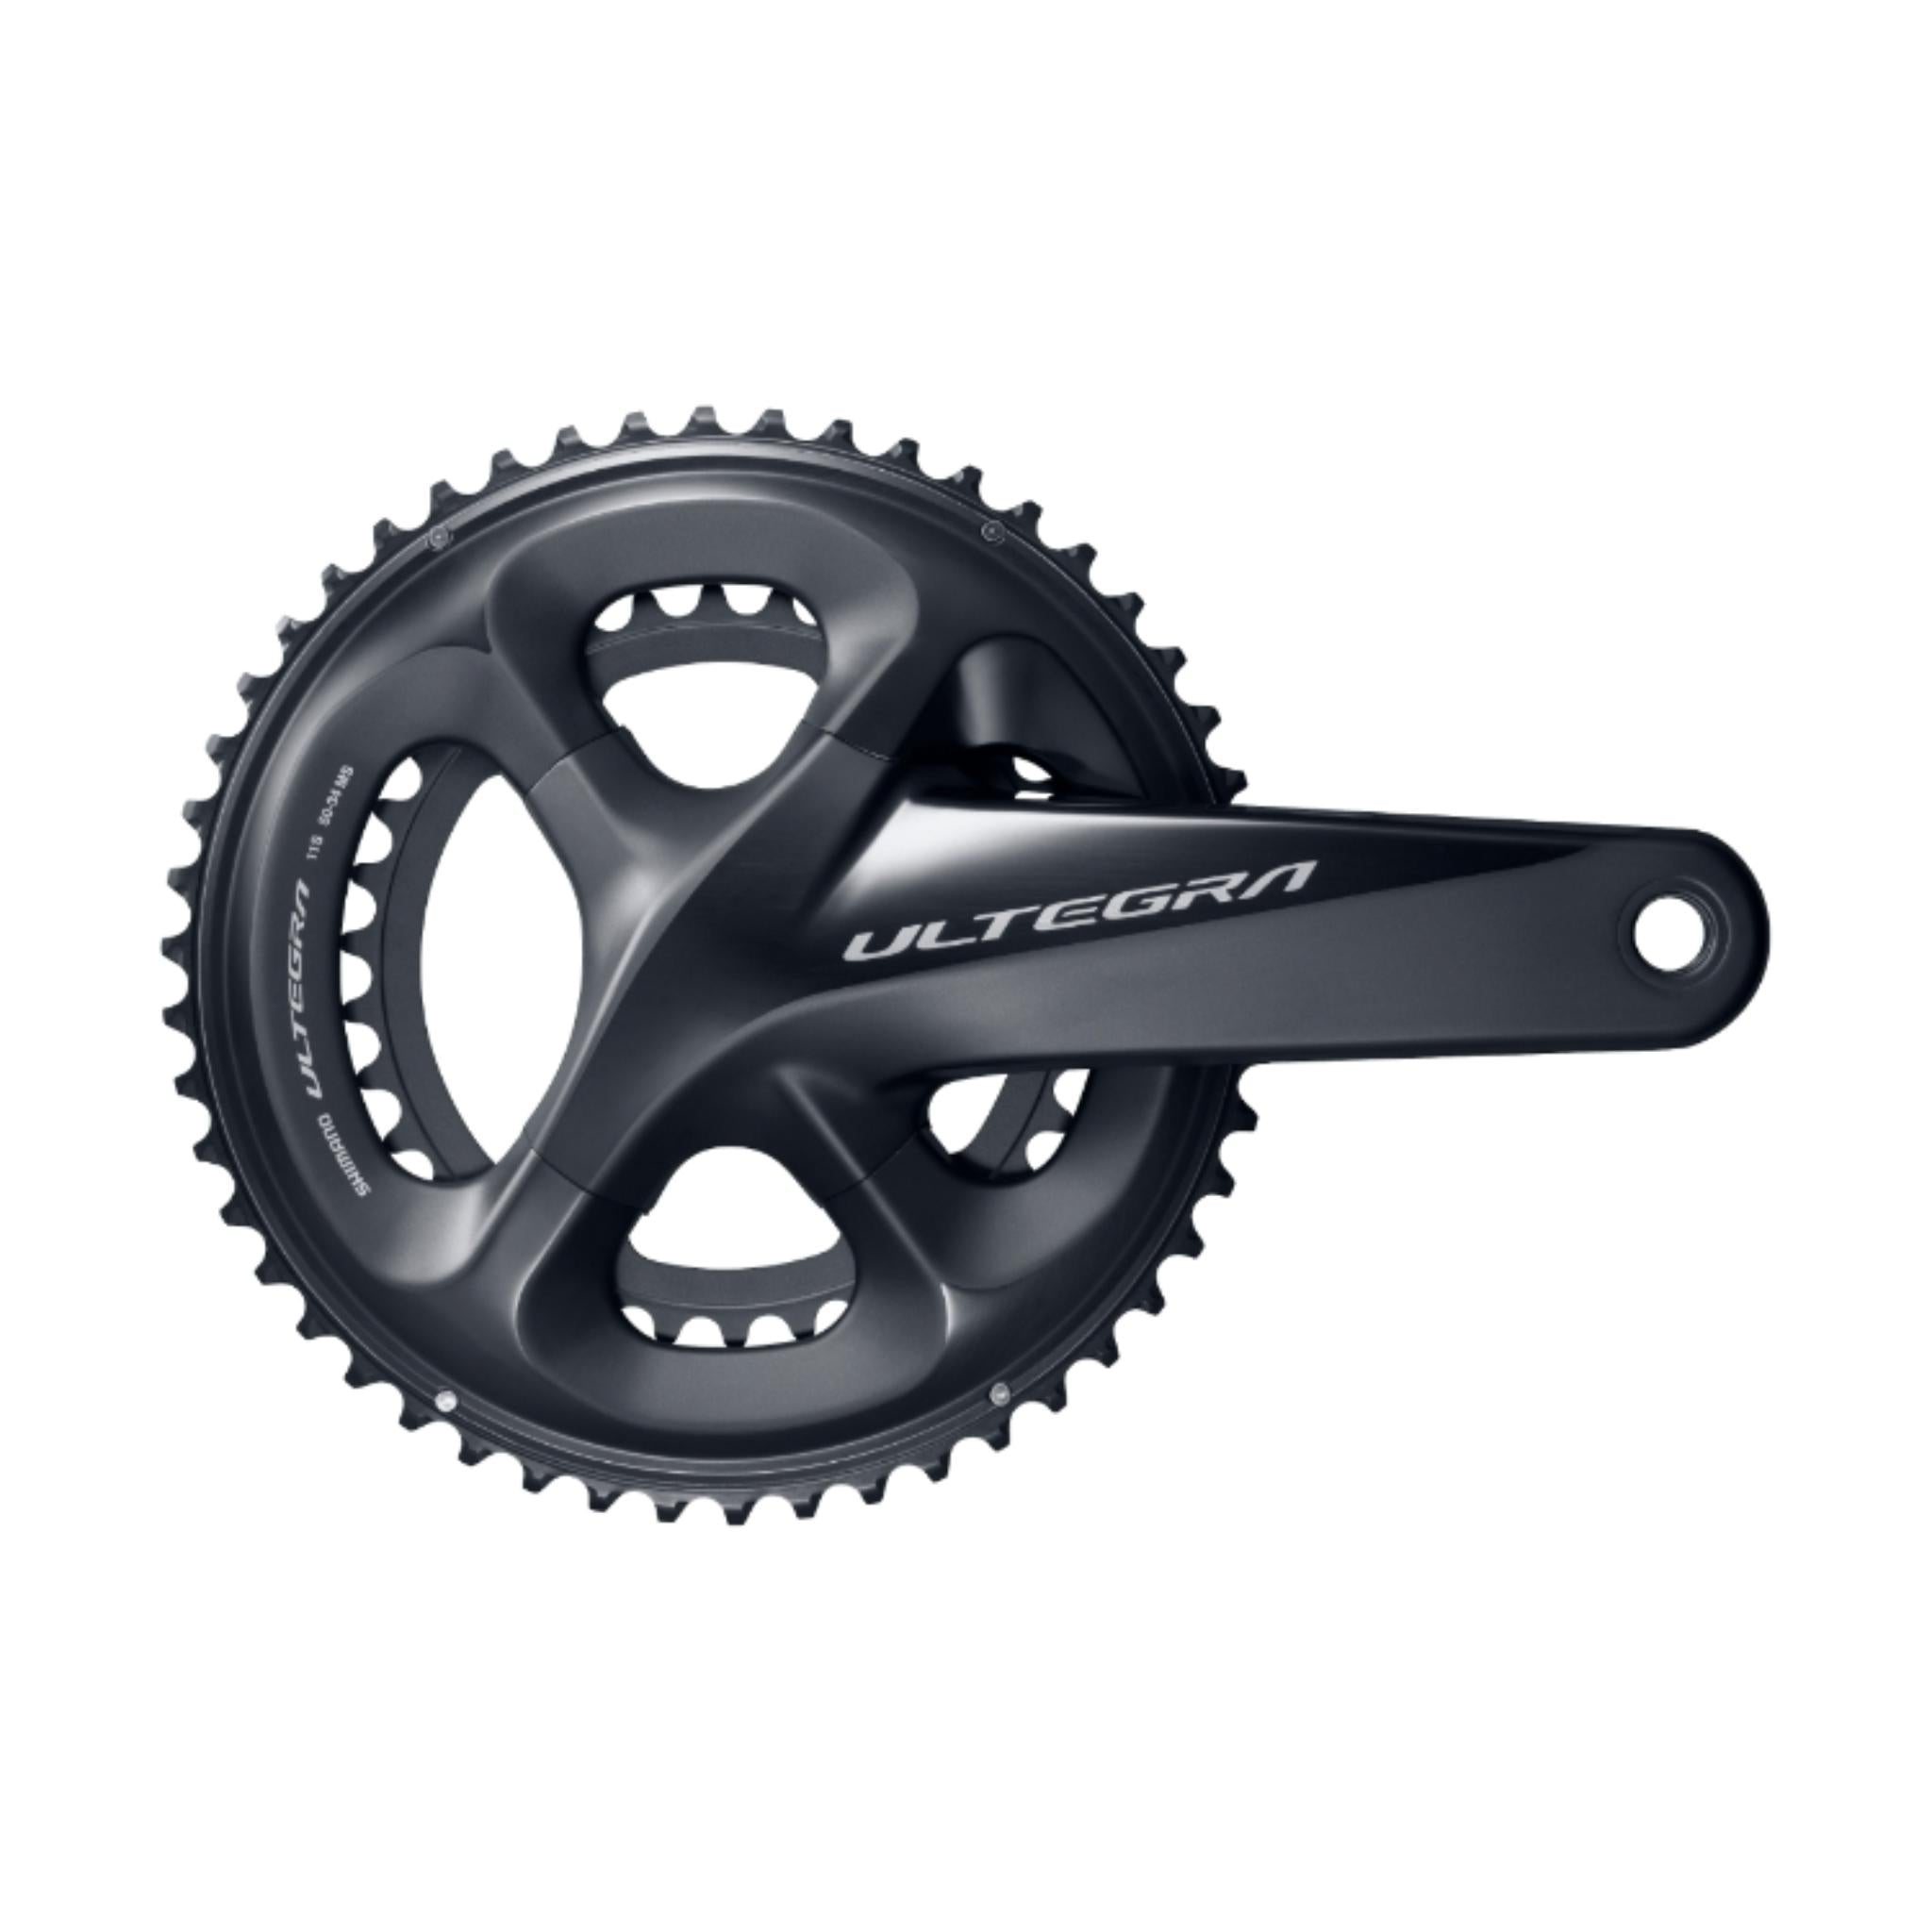 Shimano FC-R8000 Ultegra 11-Speed Double Chainset - Grey